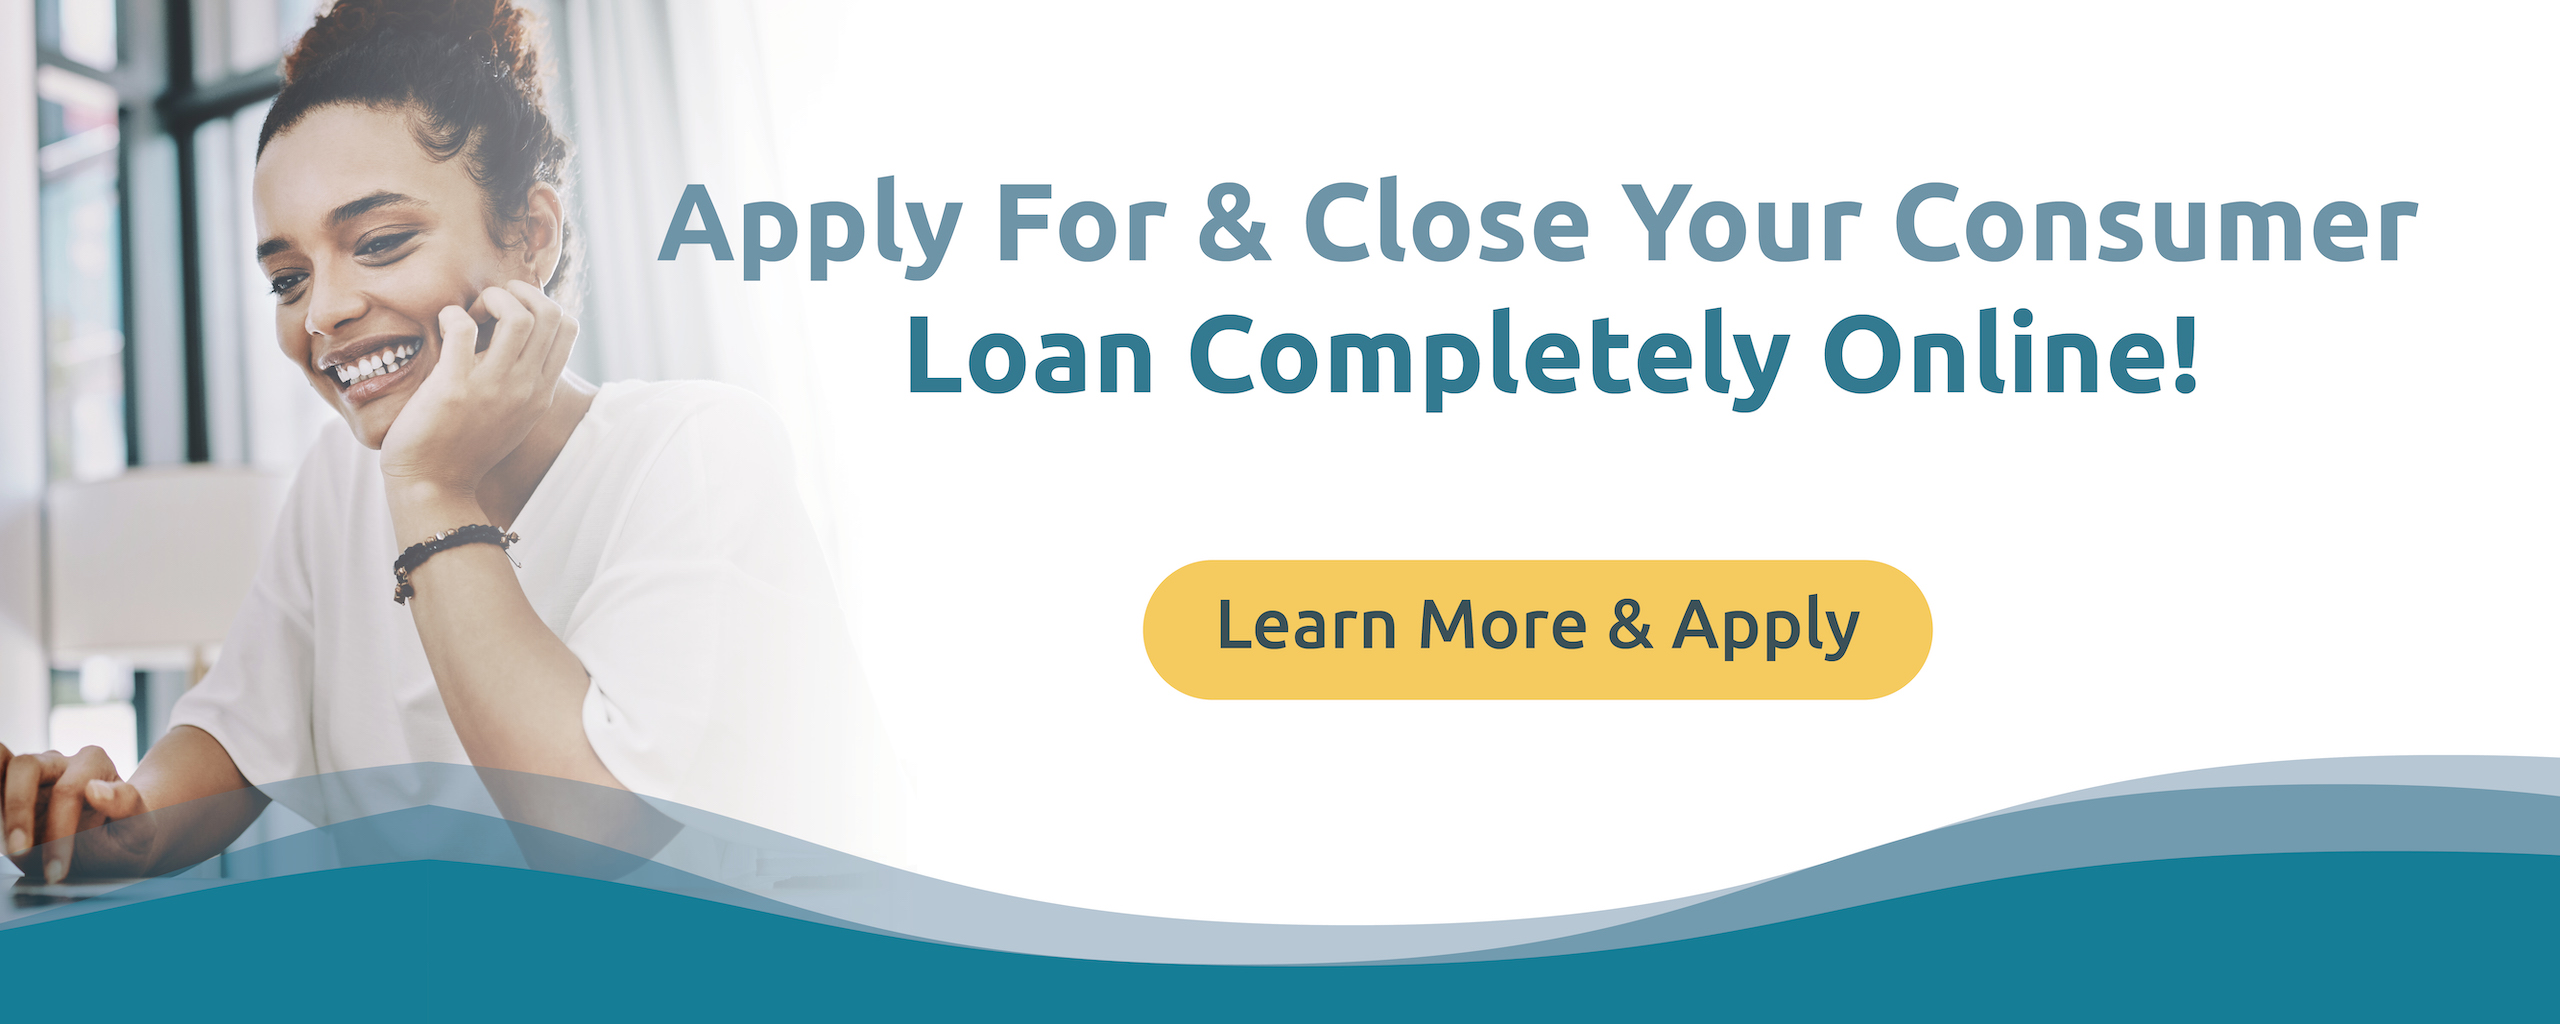 Apply for and close your consumer loan completely online!

Learn more and apply